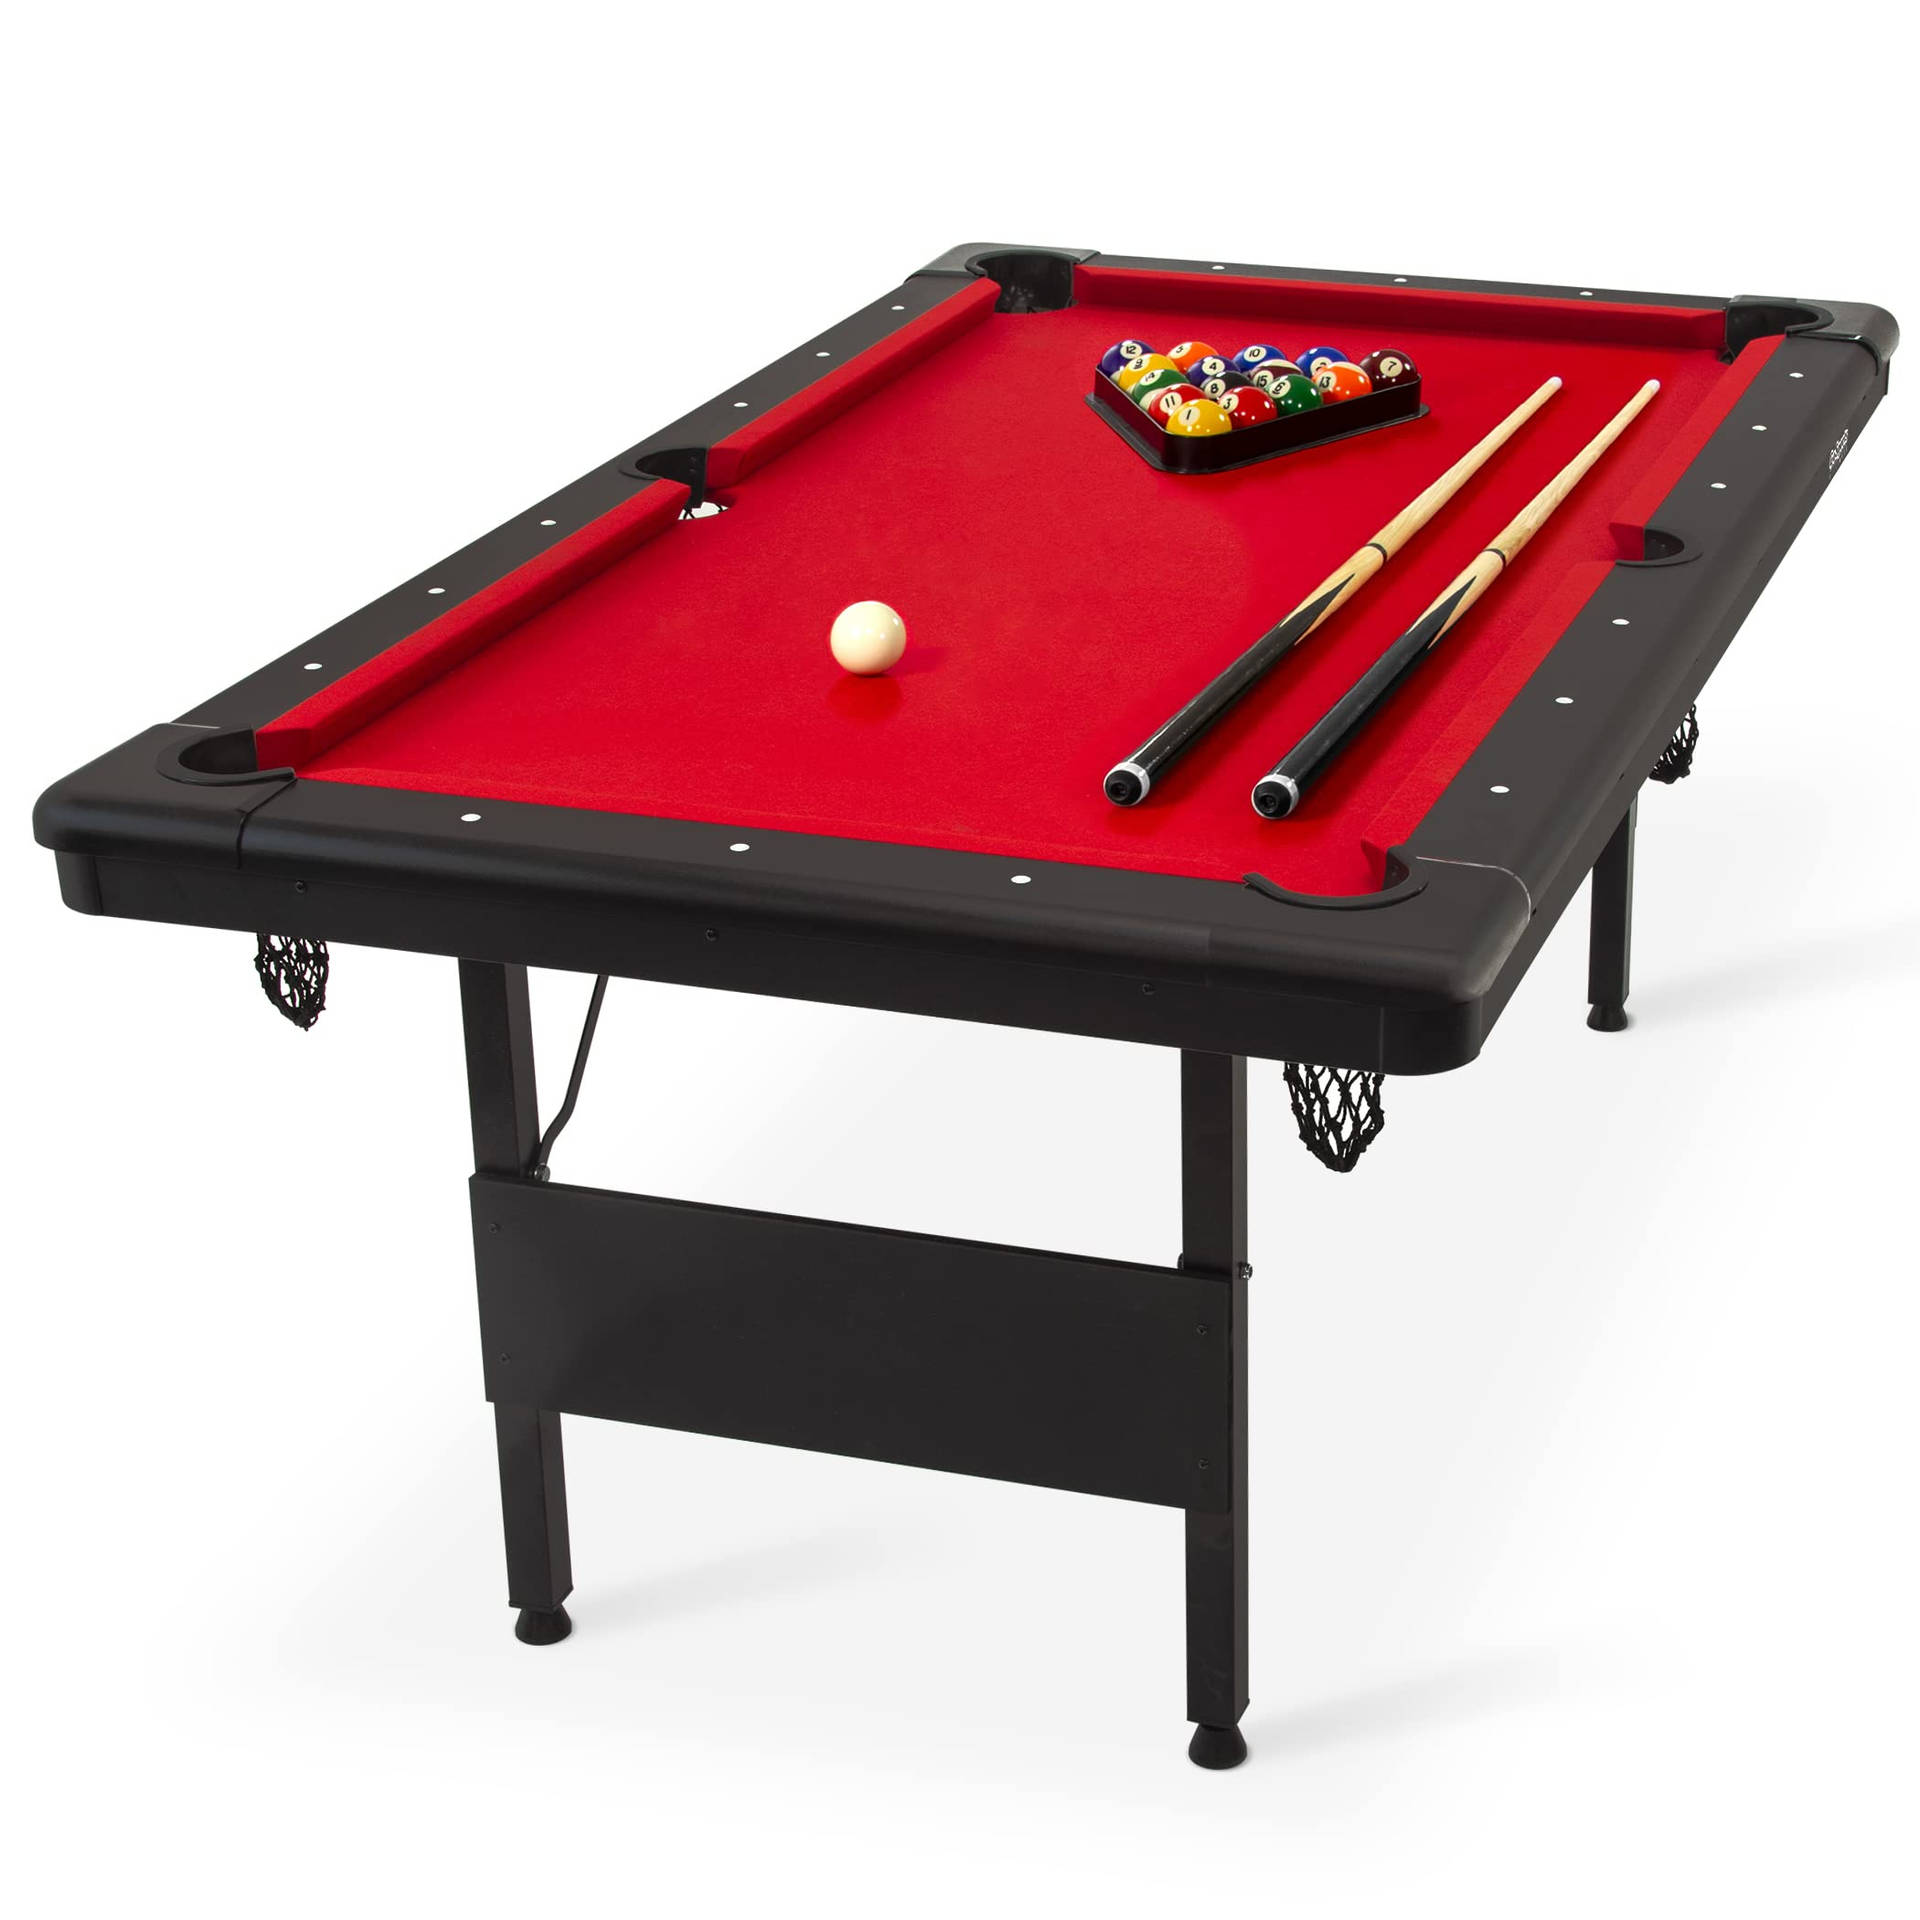 Caption: Striking Contrast of a Black and Red Pool Table Wallpaper